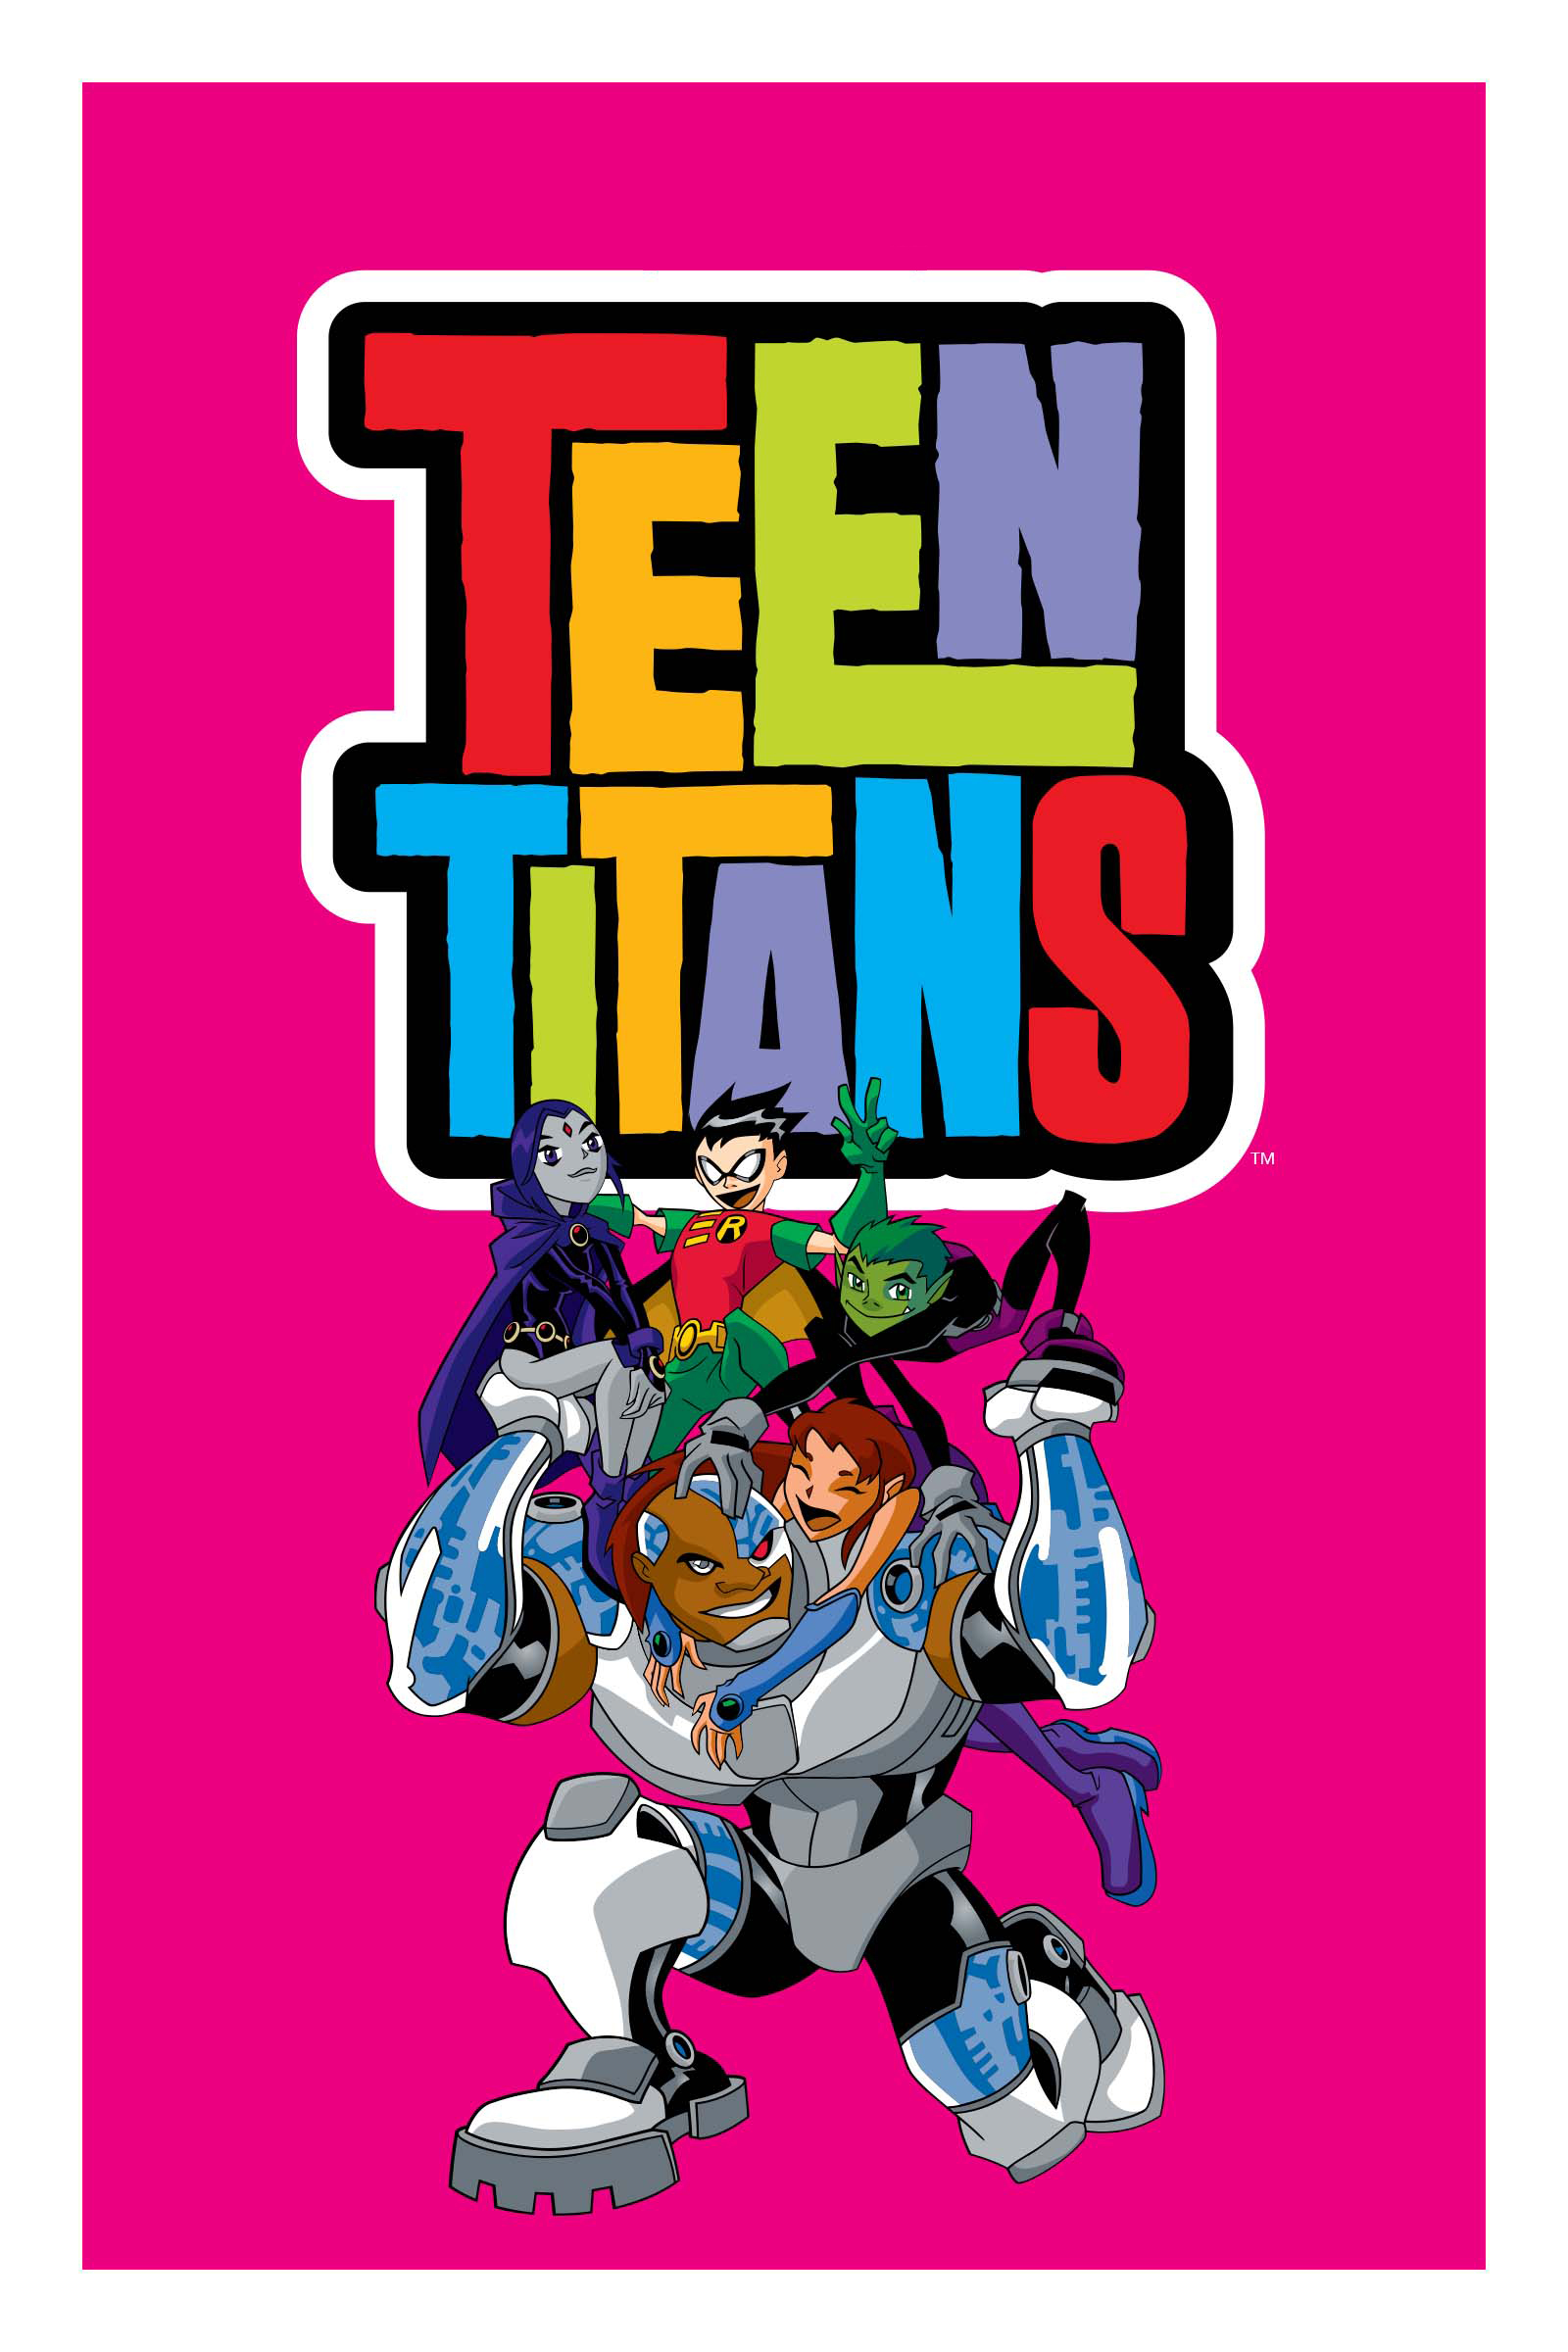 curtis koziol recommends teen titans episode guide pic